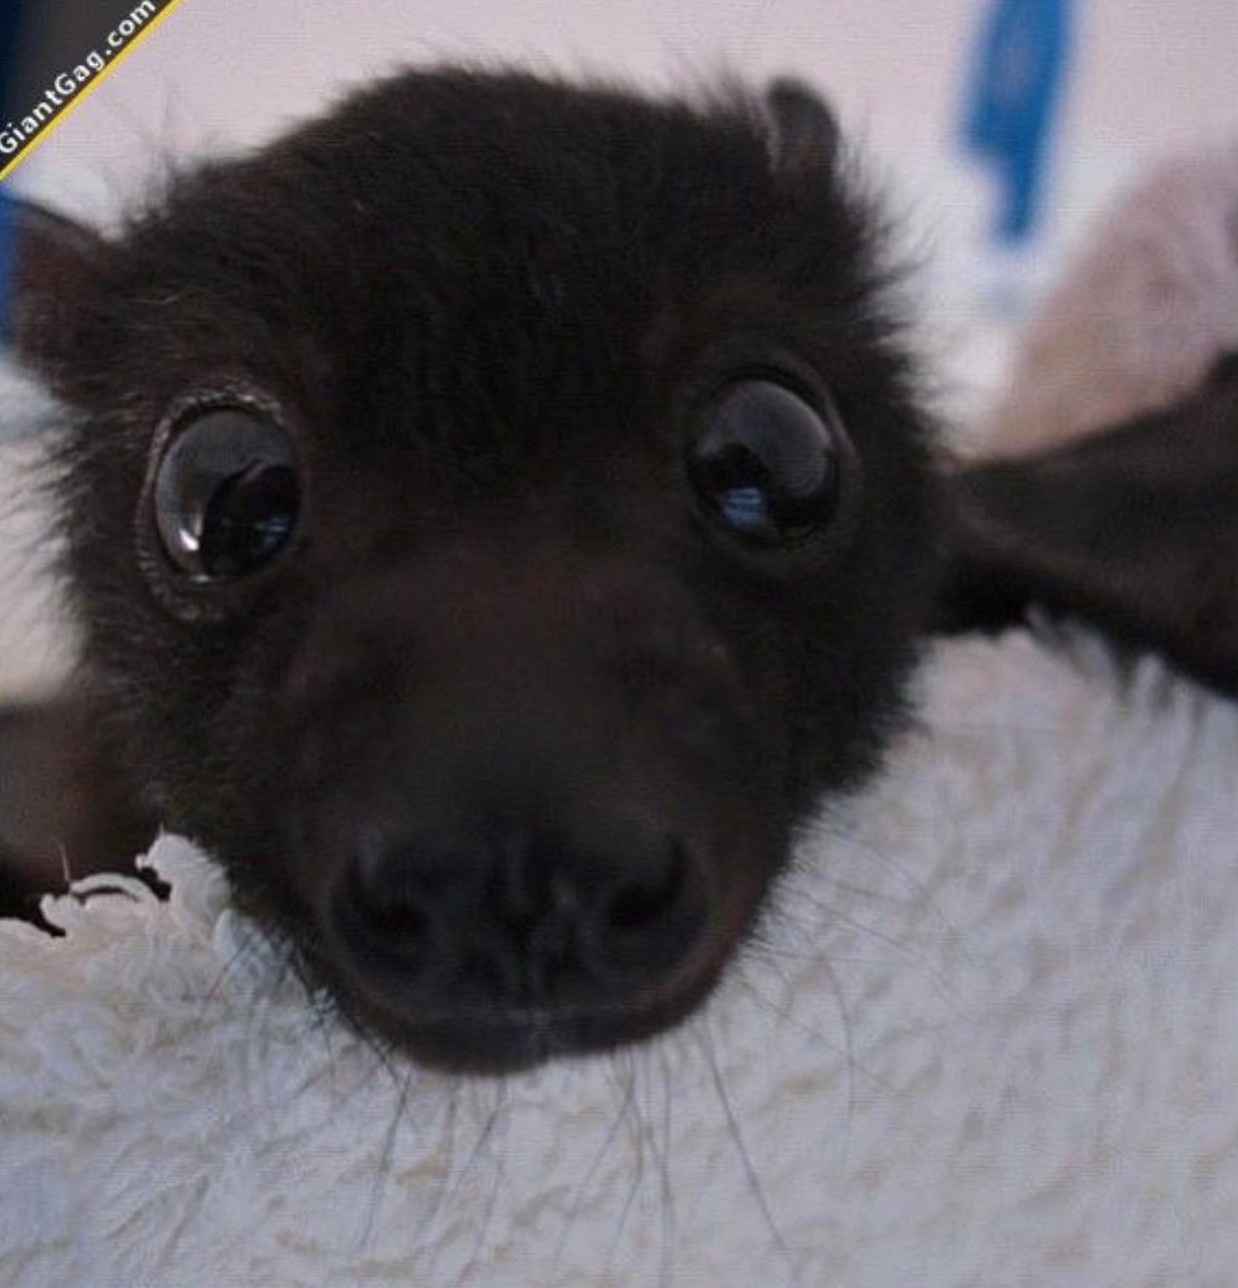 Baby Bats: How to take care of one